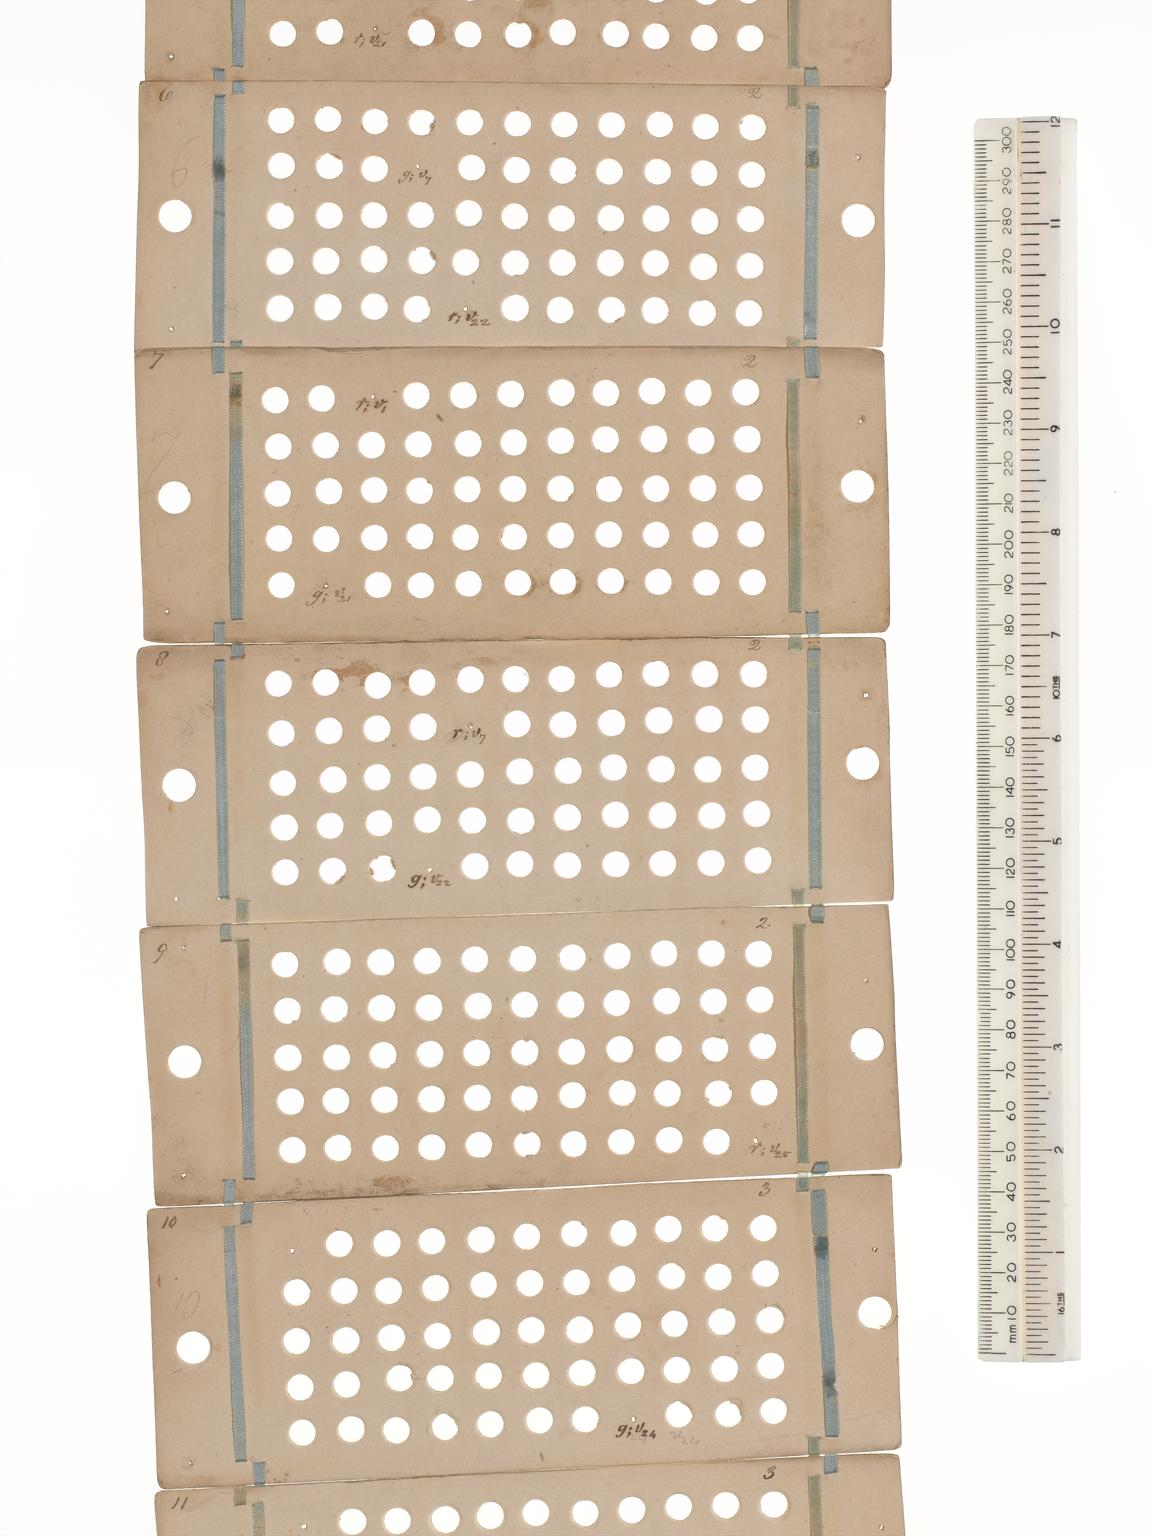 Punch Cards: 19th Century Coverlet Technology